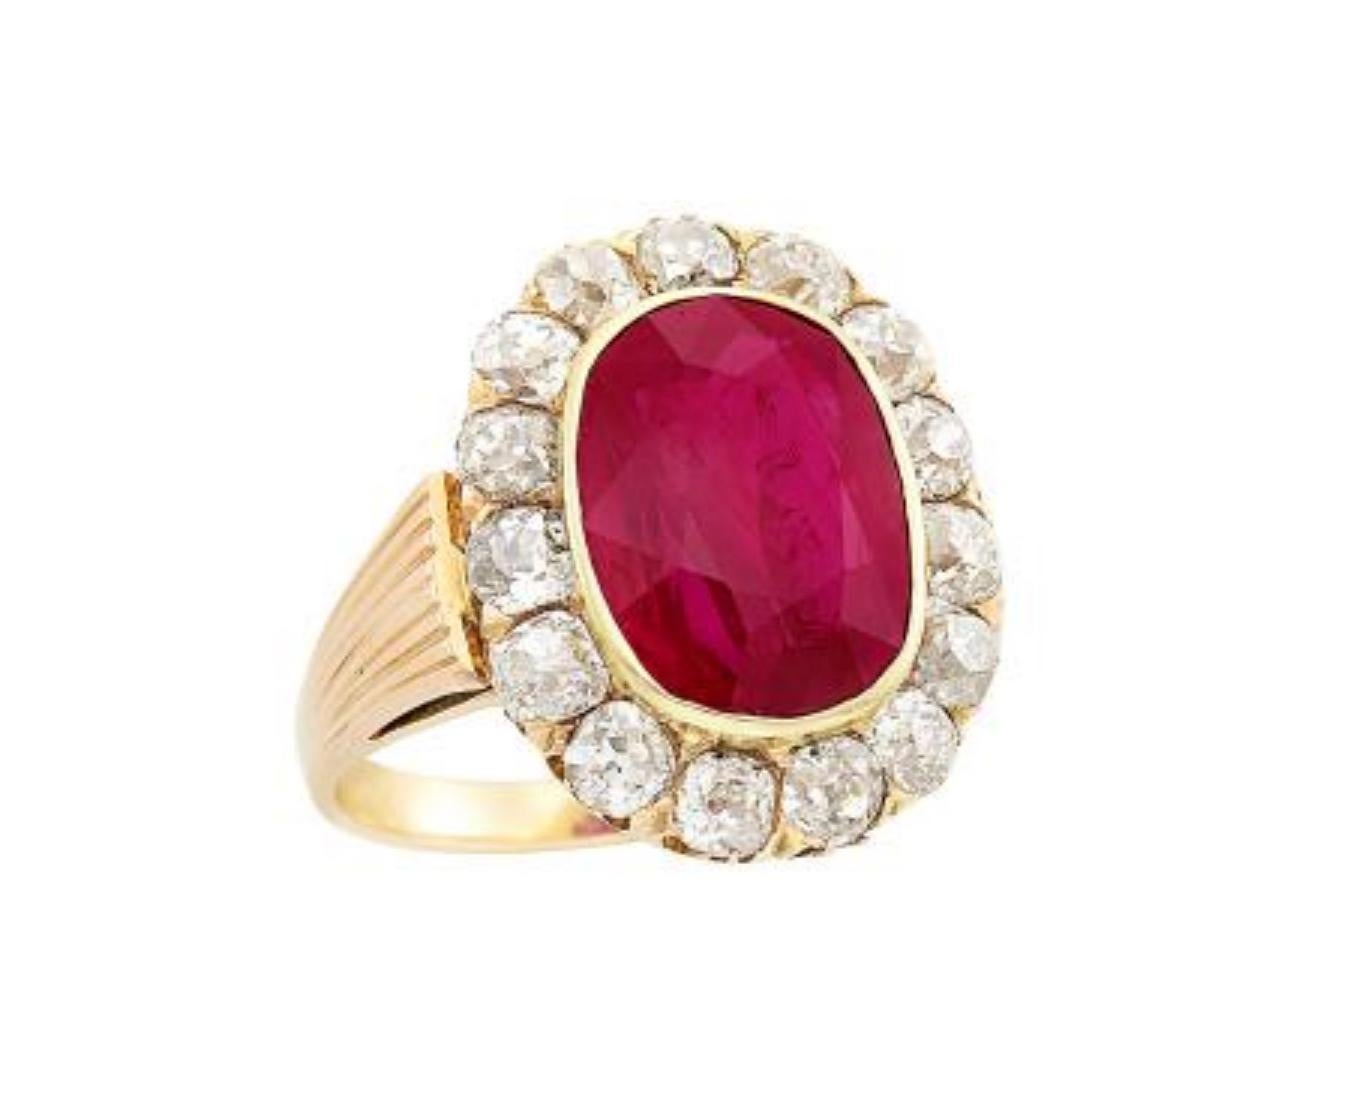 14 kt., centering one oval ruby approximately 7.50 cts., surrounded by 15 old-mine cut diamonds approximately 2.00 cts., approximately 5.8 dwts. Size 7 1/4  Ruby: vivid raspberry red, very good color concentration, moderately included, several